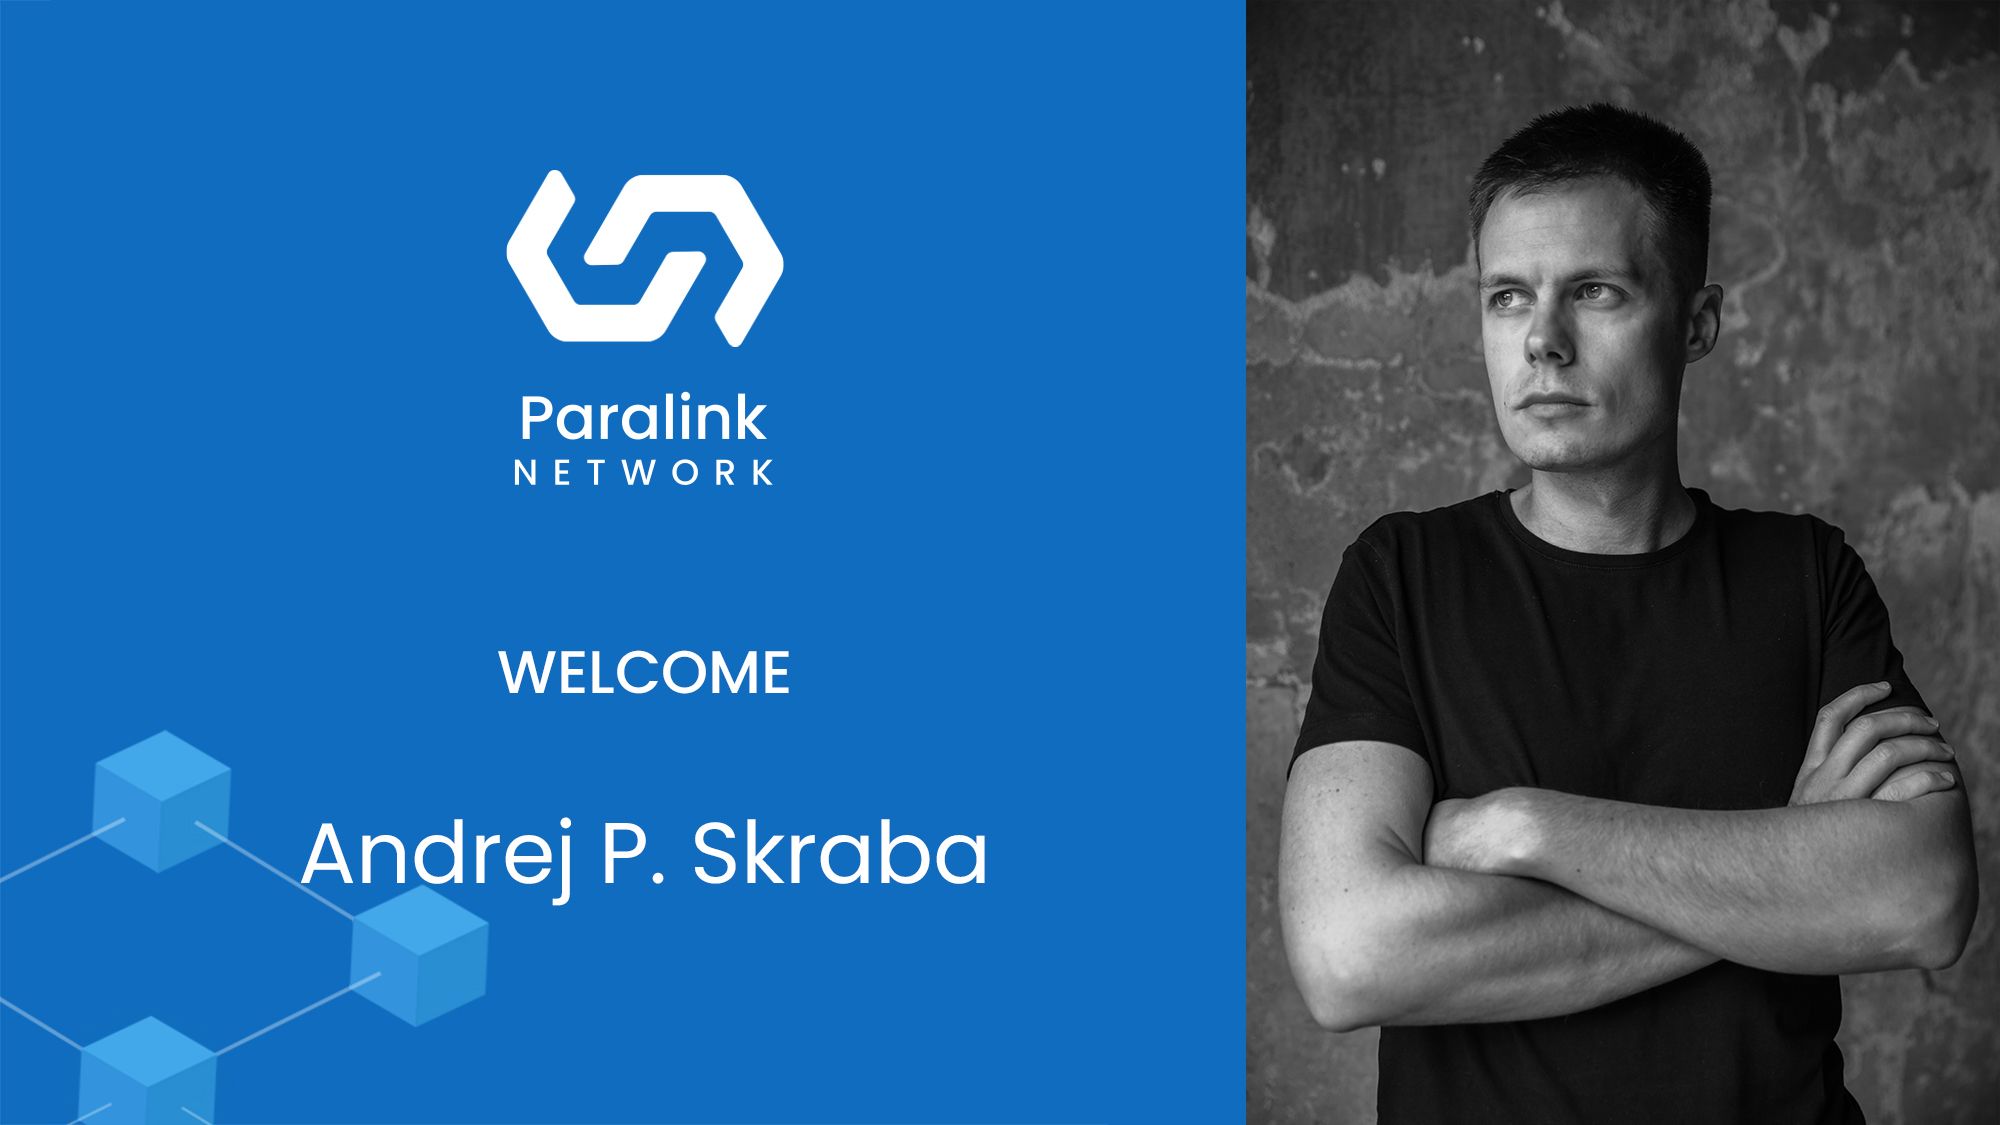 Andrej P. Skraba joins Paralink as the new CMO!